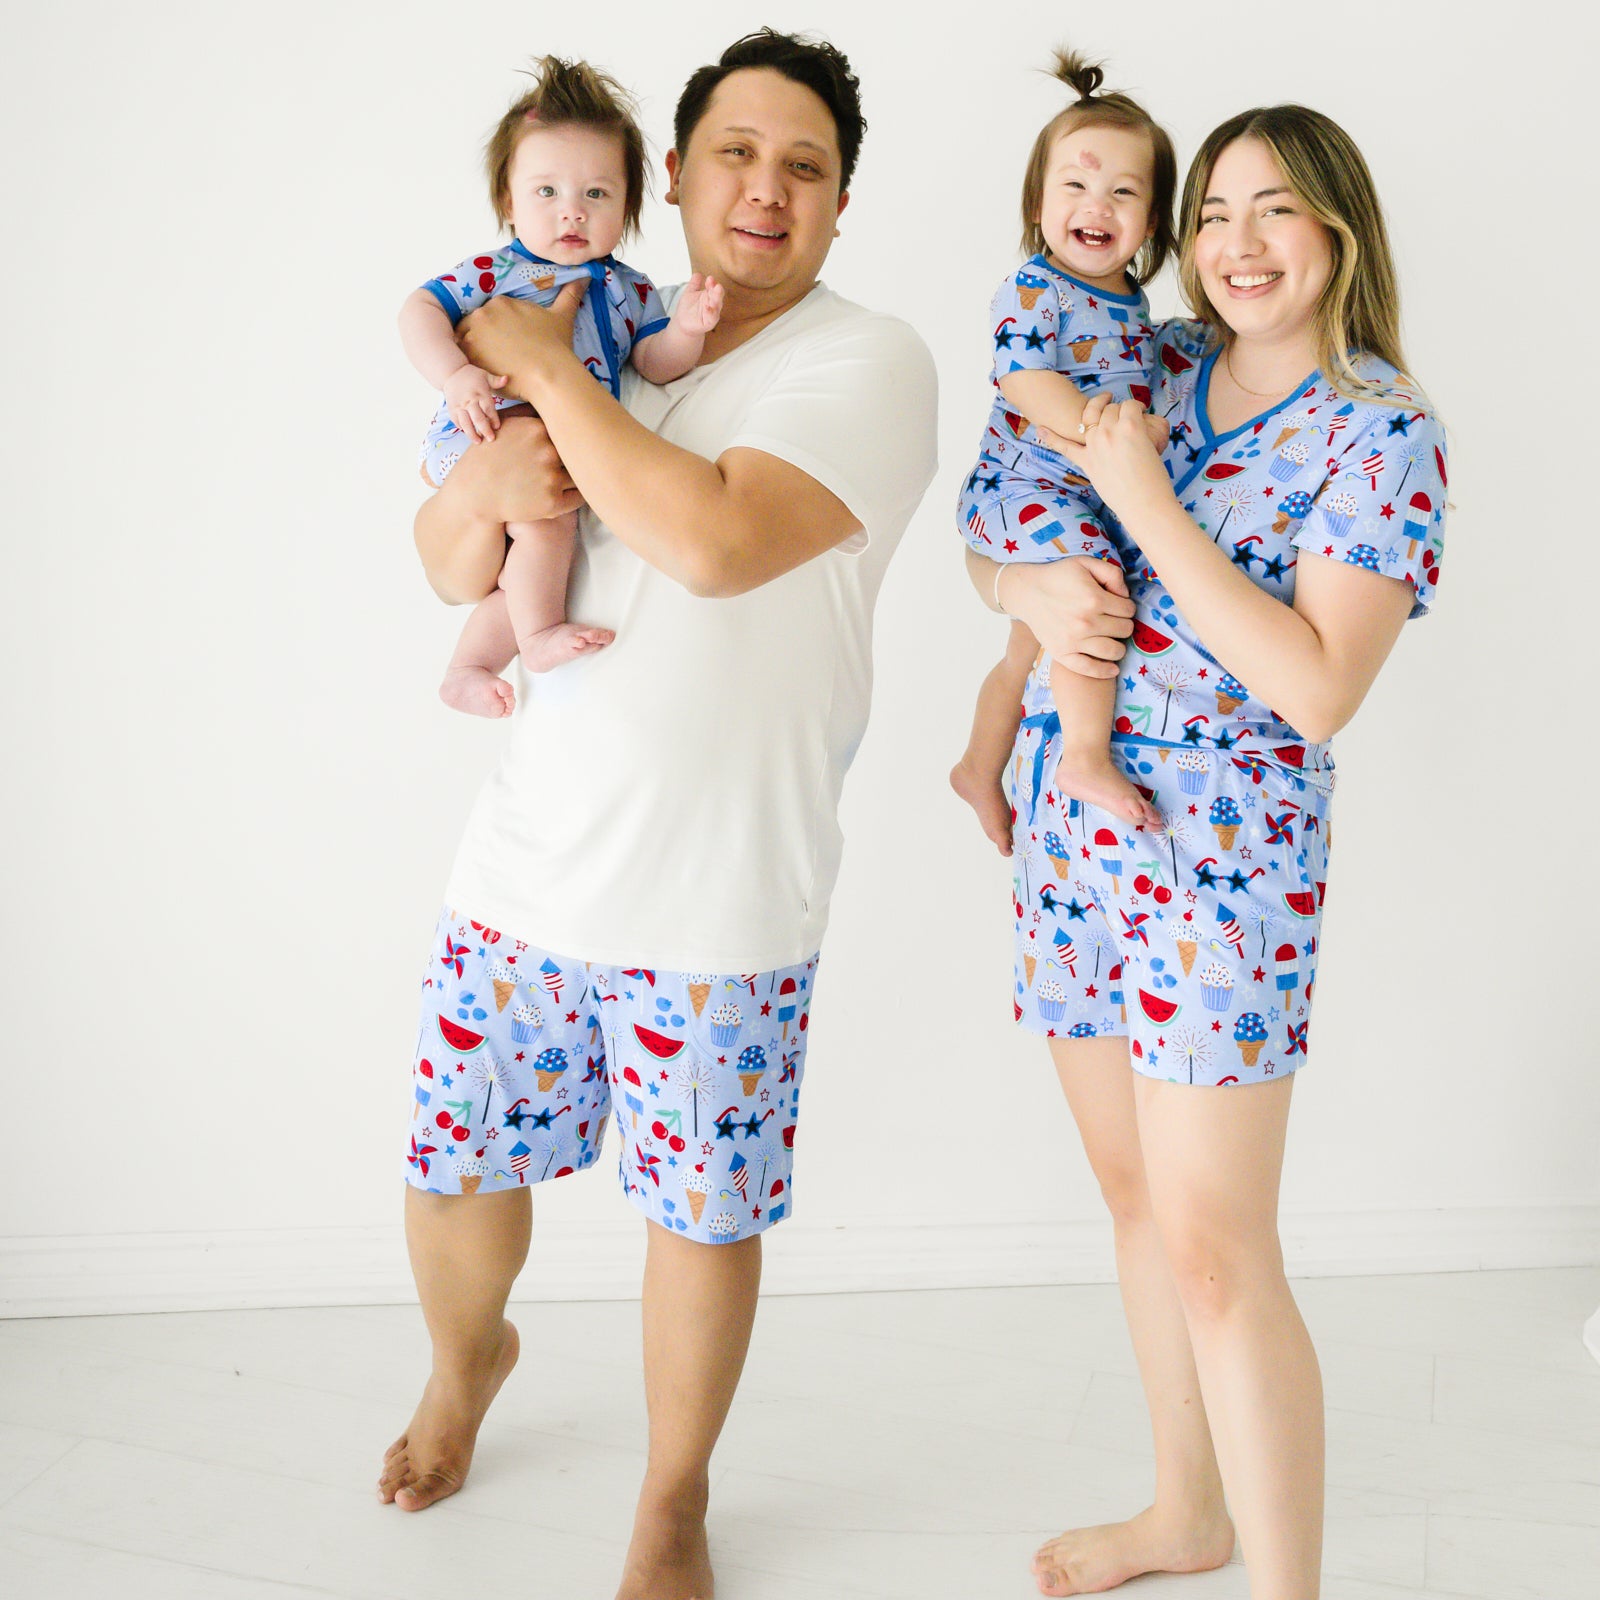 Family of four wearing matching Stars, Stripes, and Sweets pajamas. Dad is wearing a bright white men's pj top paired with men's Stars, Stripes, and Sweets men's pj shorts. Mom is wearing a Stars and Stripes and Sweets women's pj top and matching women's pj shorts. Their kids are wearing Stars, Stripes, and Sweets in zippy and two piece styles